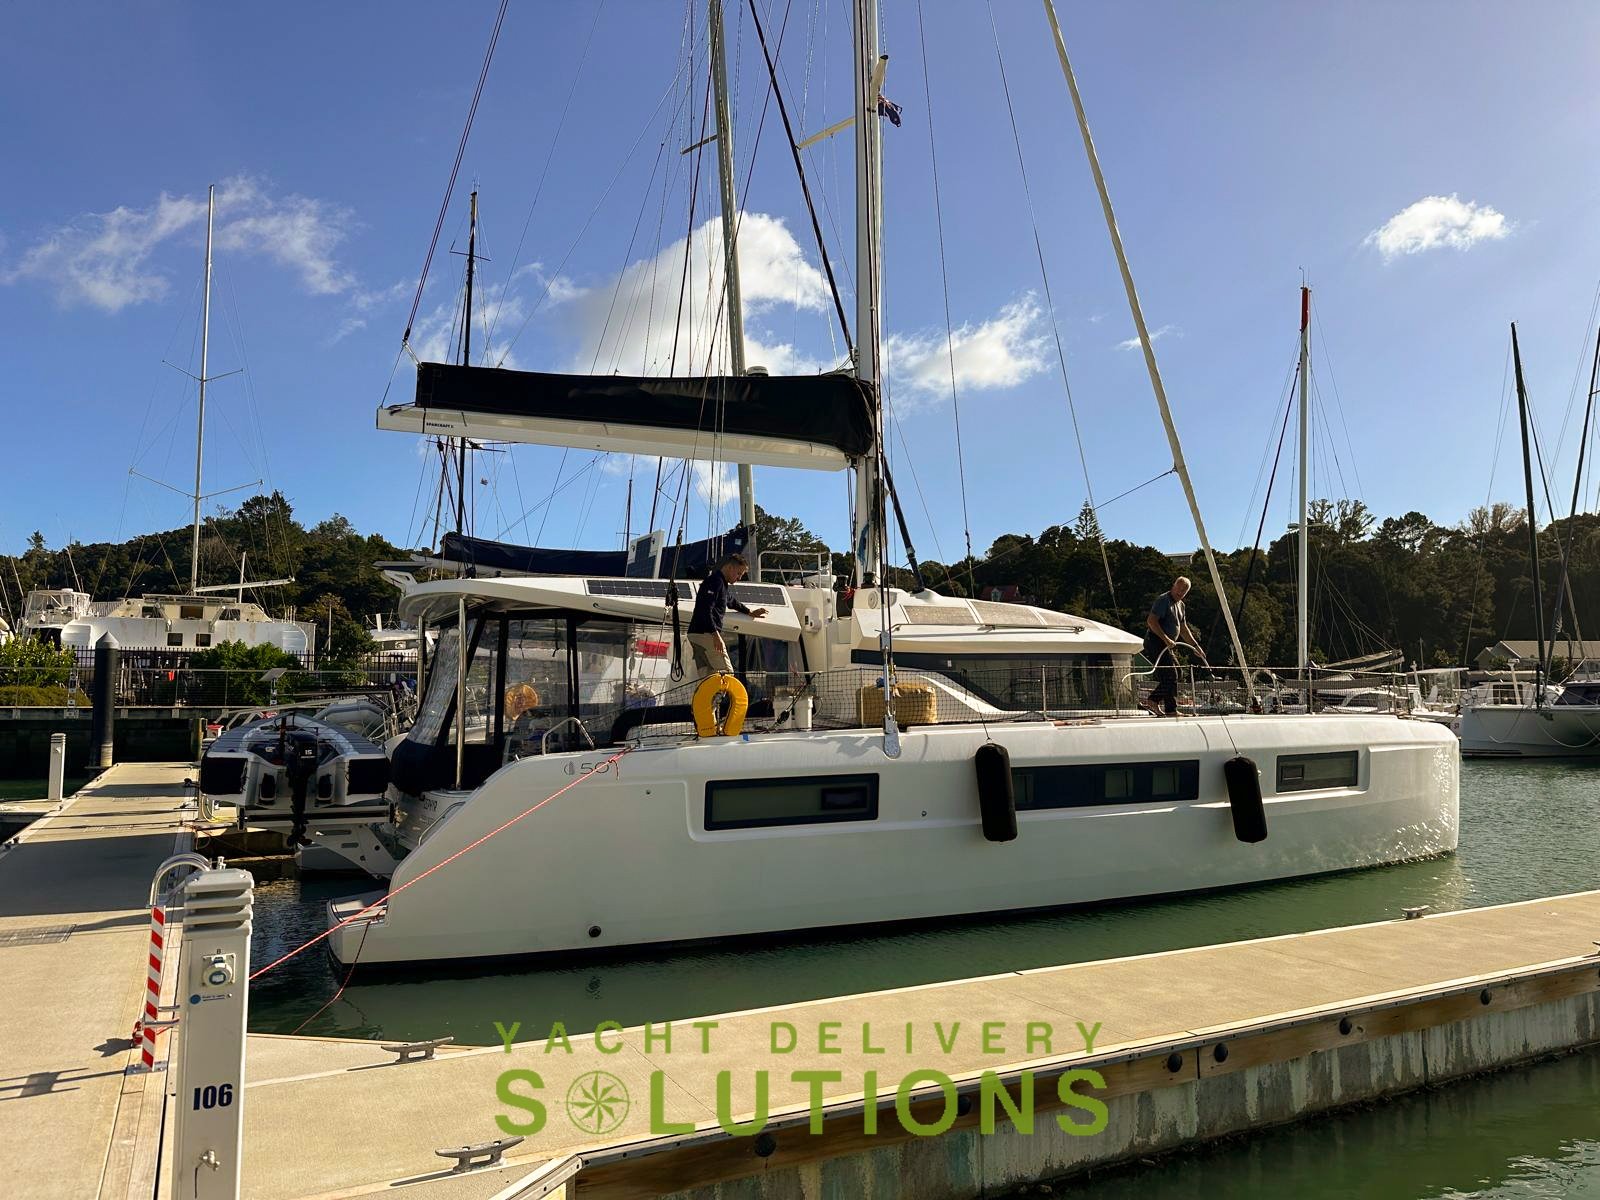 Lagoon 50 delivered by yacht delivery solutions